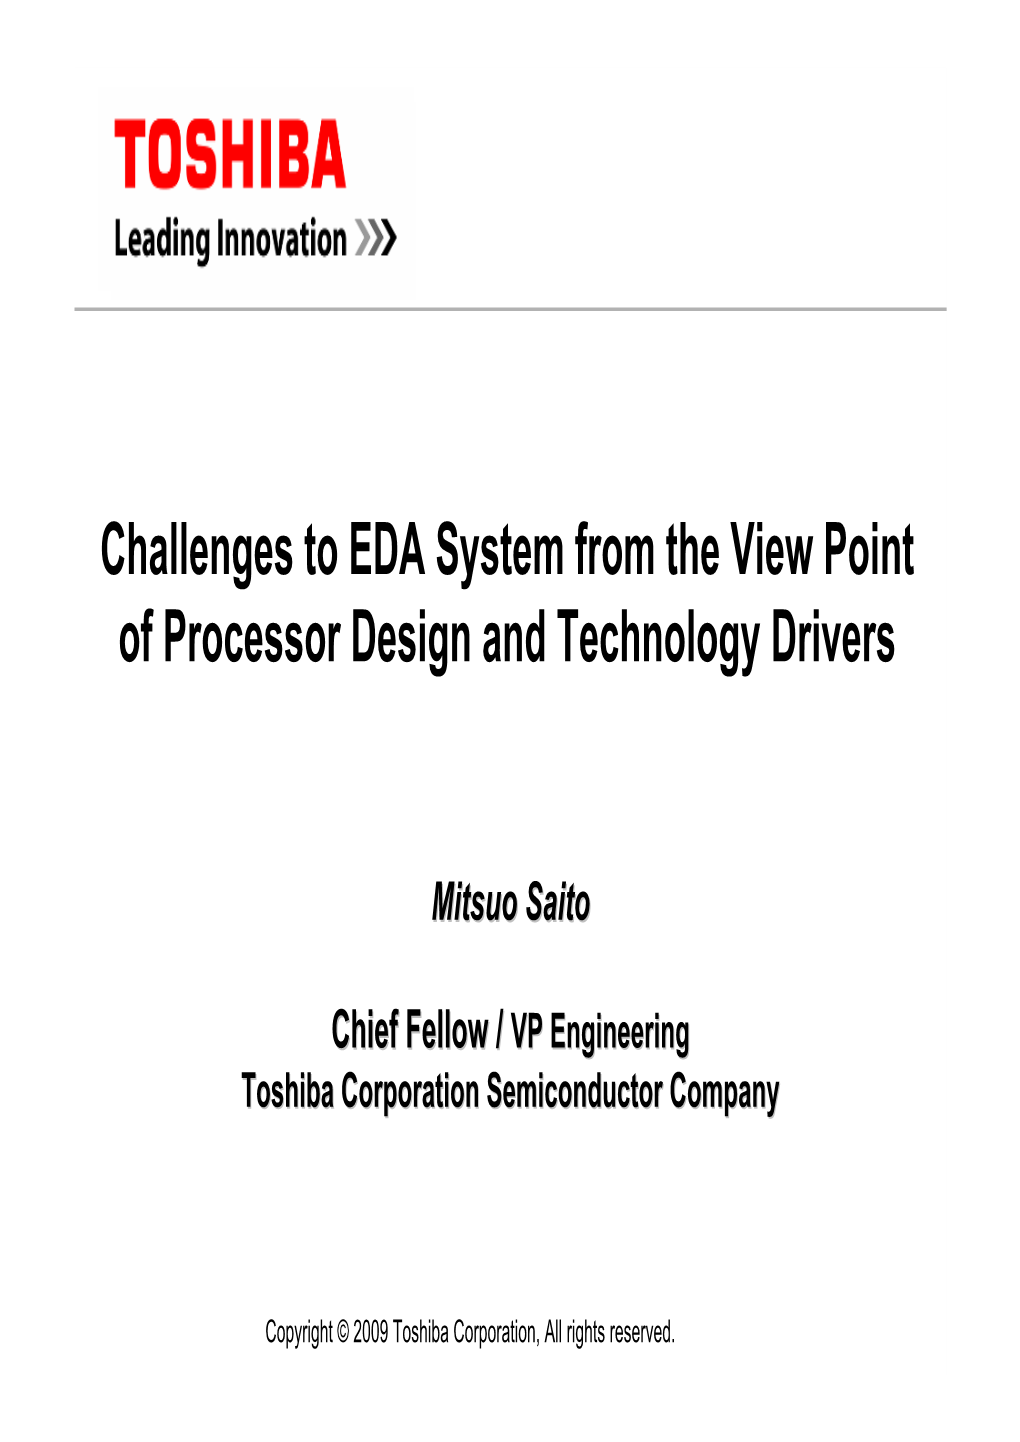 Challenges to EDA System from the View Point of Processor Design and Technology Drivers